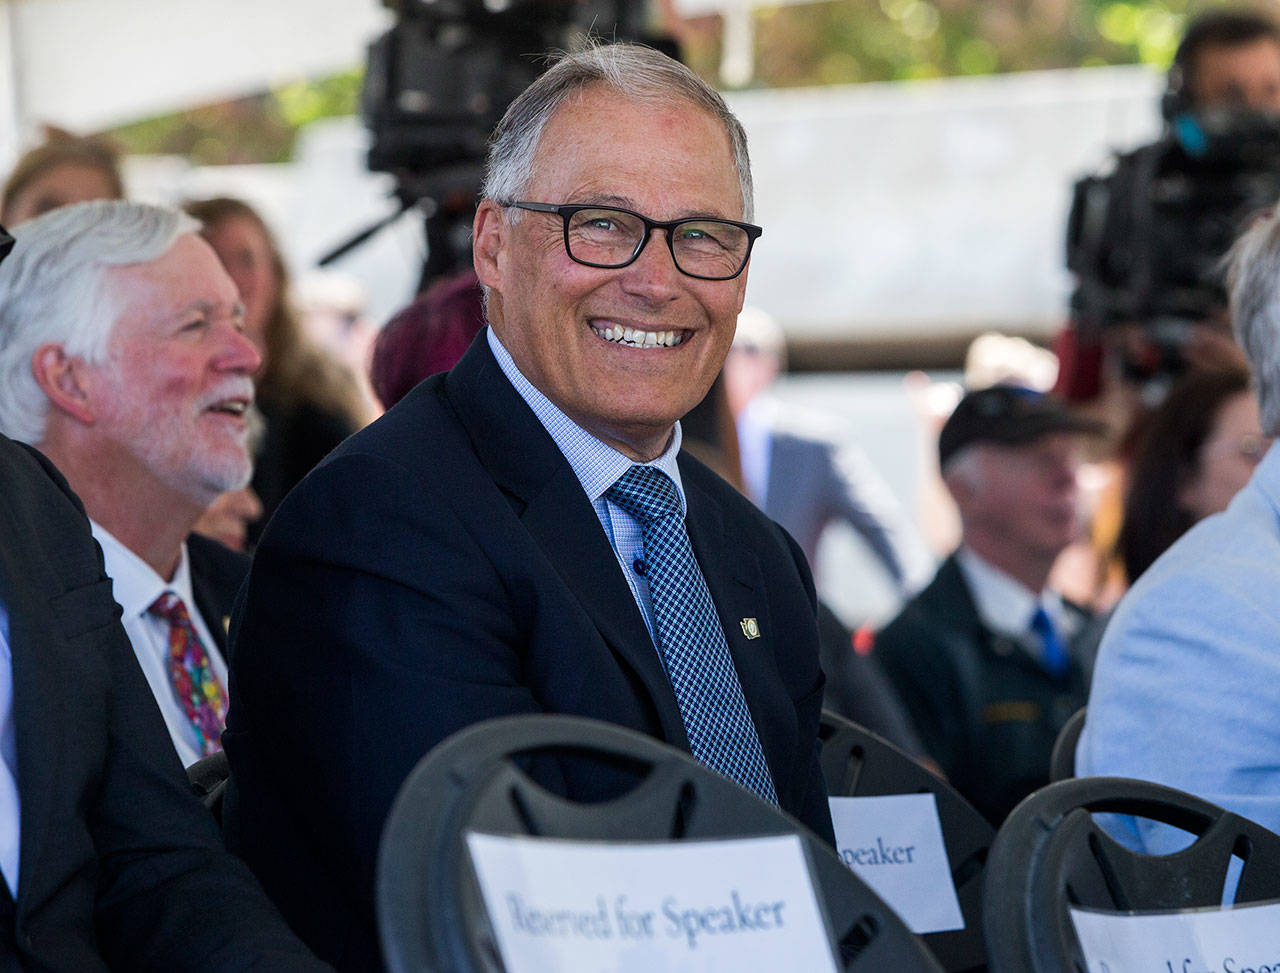 Governor Jay Inslee smiles and laughs Sept. 3, 2019, during a speech at the Lynnwood Link Extension groundbreaking in Lynnwood. A Thurston County judge ruled he exceeded his authority when he vetoed single sentences in the state transportation budget in 2019. (Olivia Vanni / Herald file)